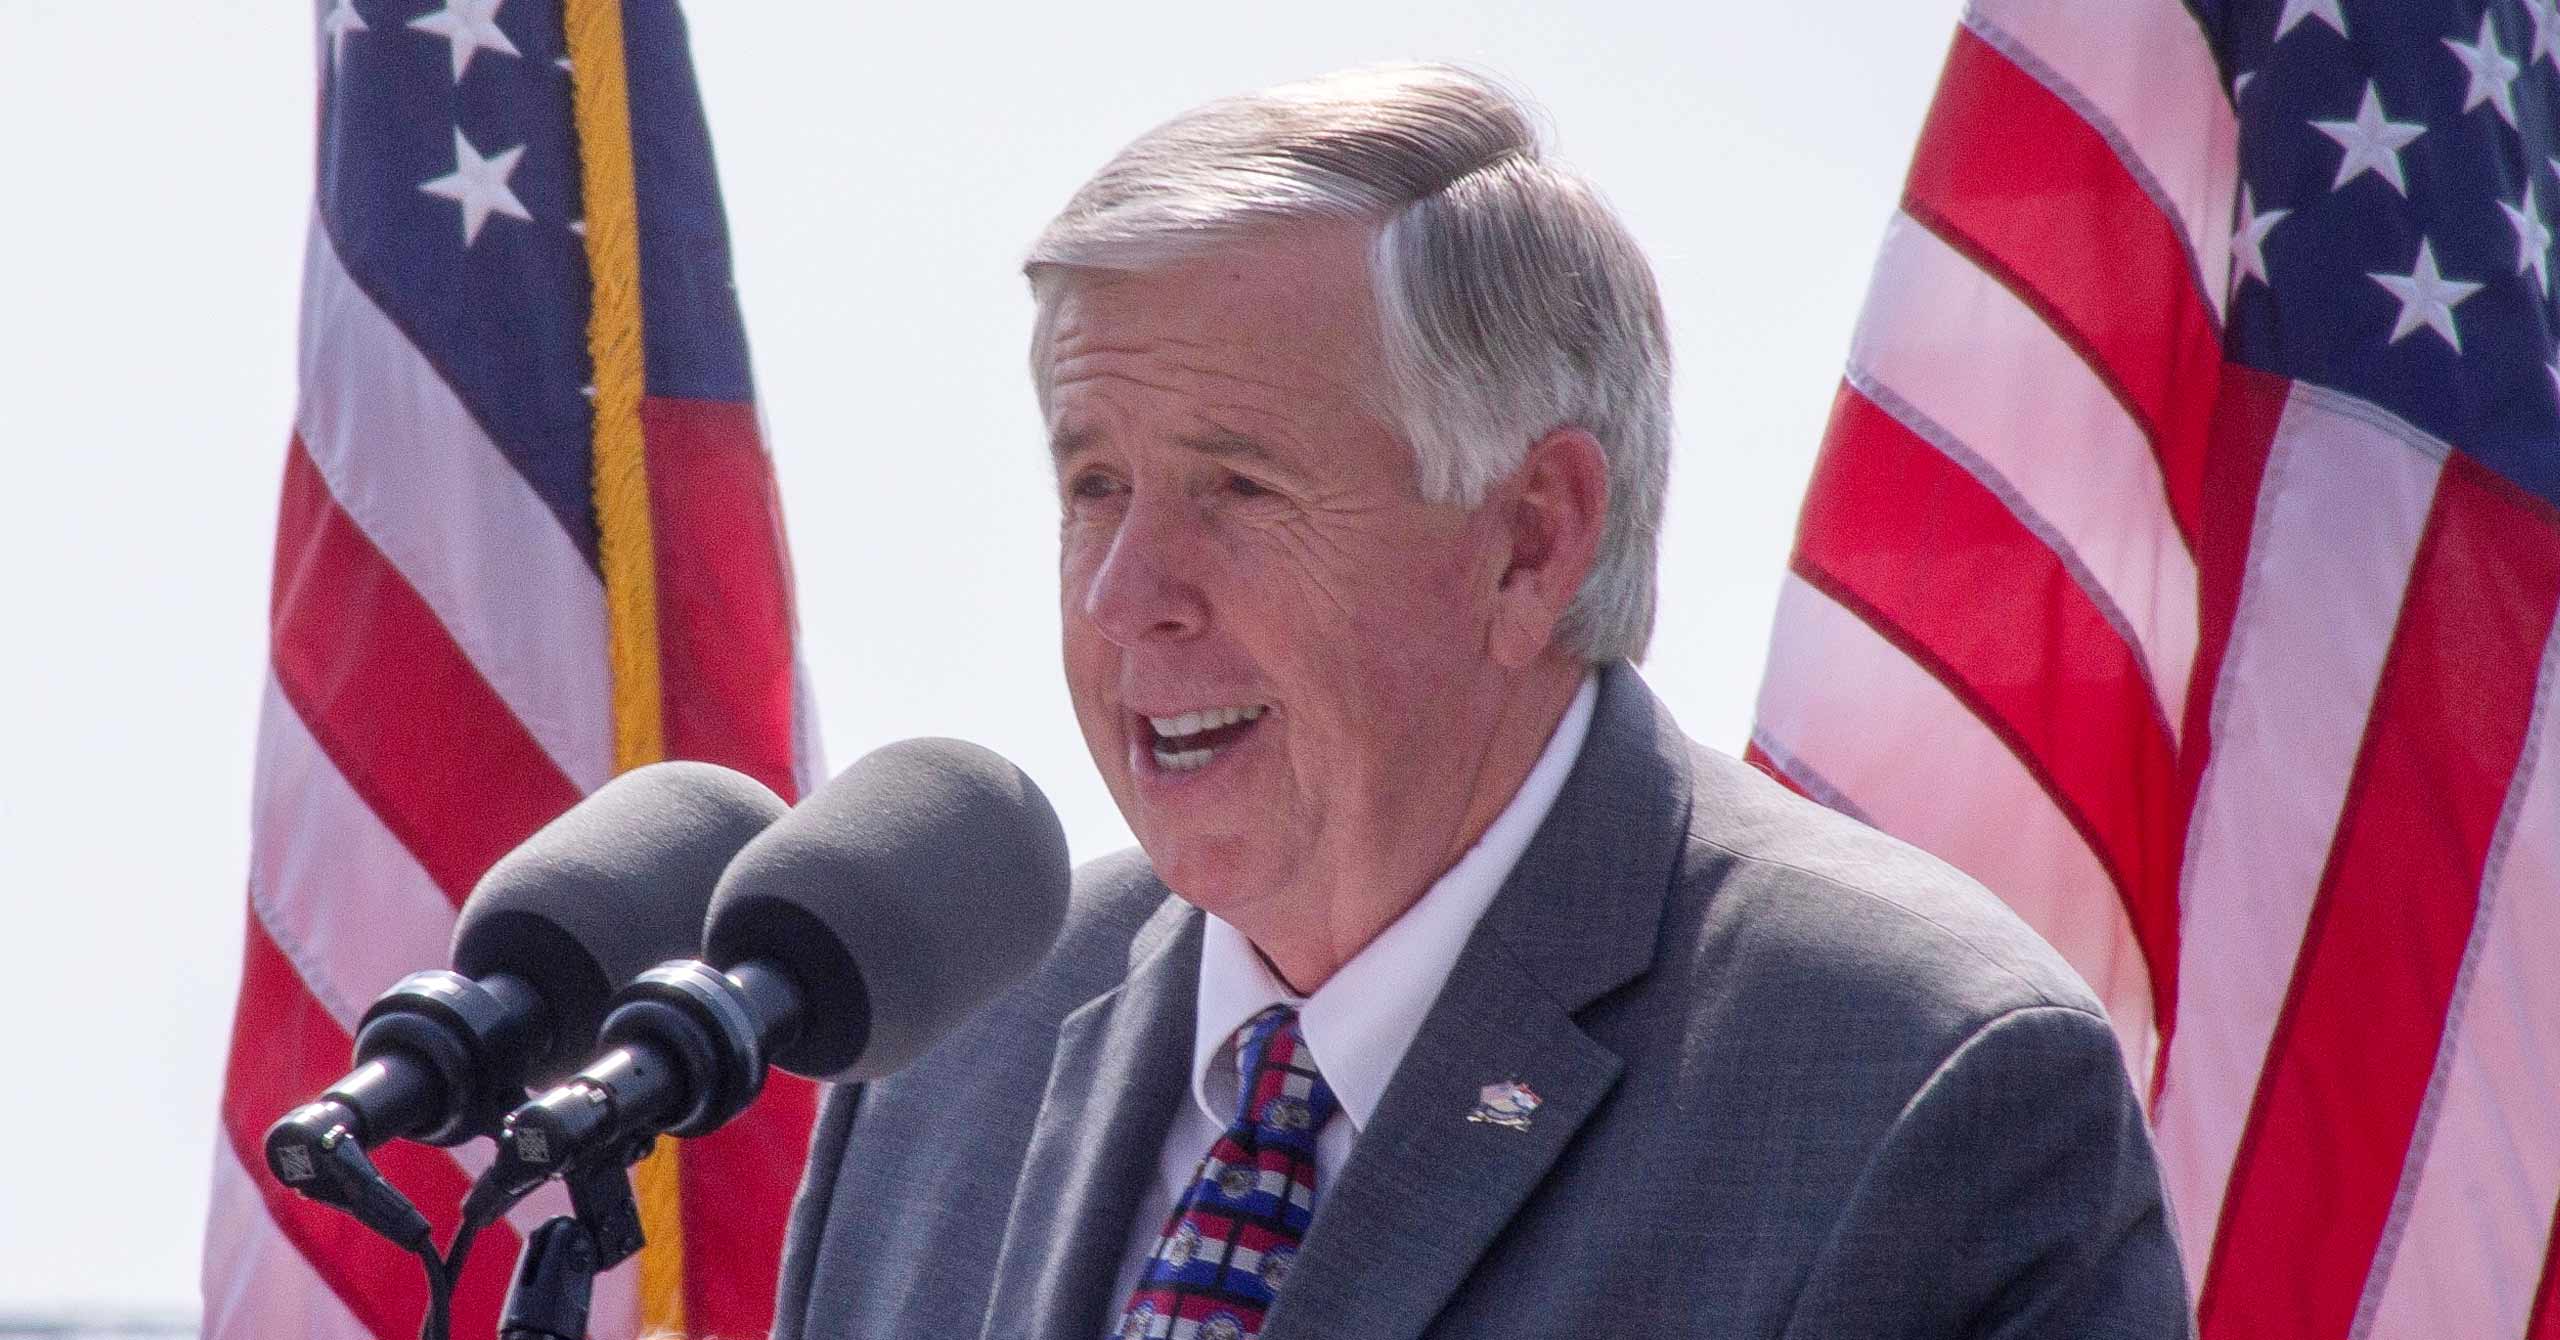 Missouri Gov. Mike Parson is opposed to Medicaid expansion but says he'll “uphold the will of the people” if the measure ends up on the ballot and voters approve it.